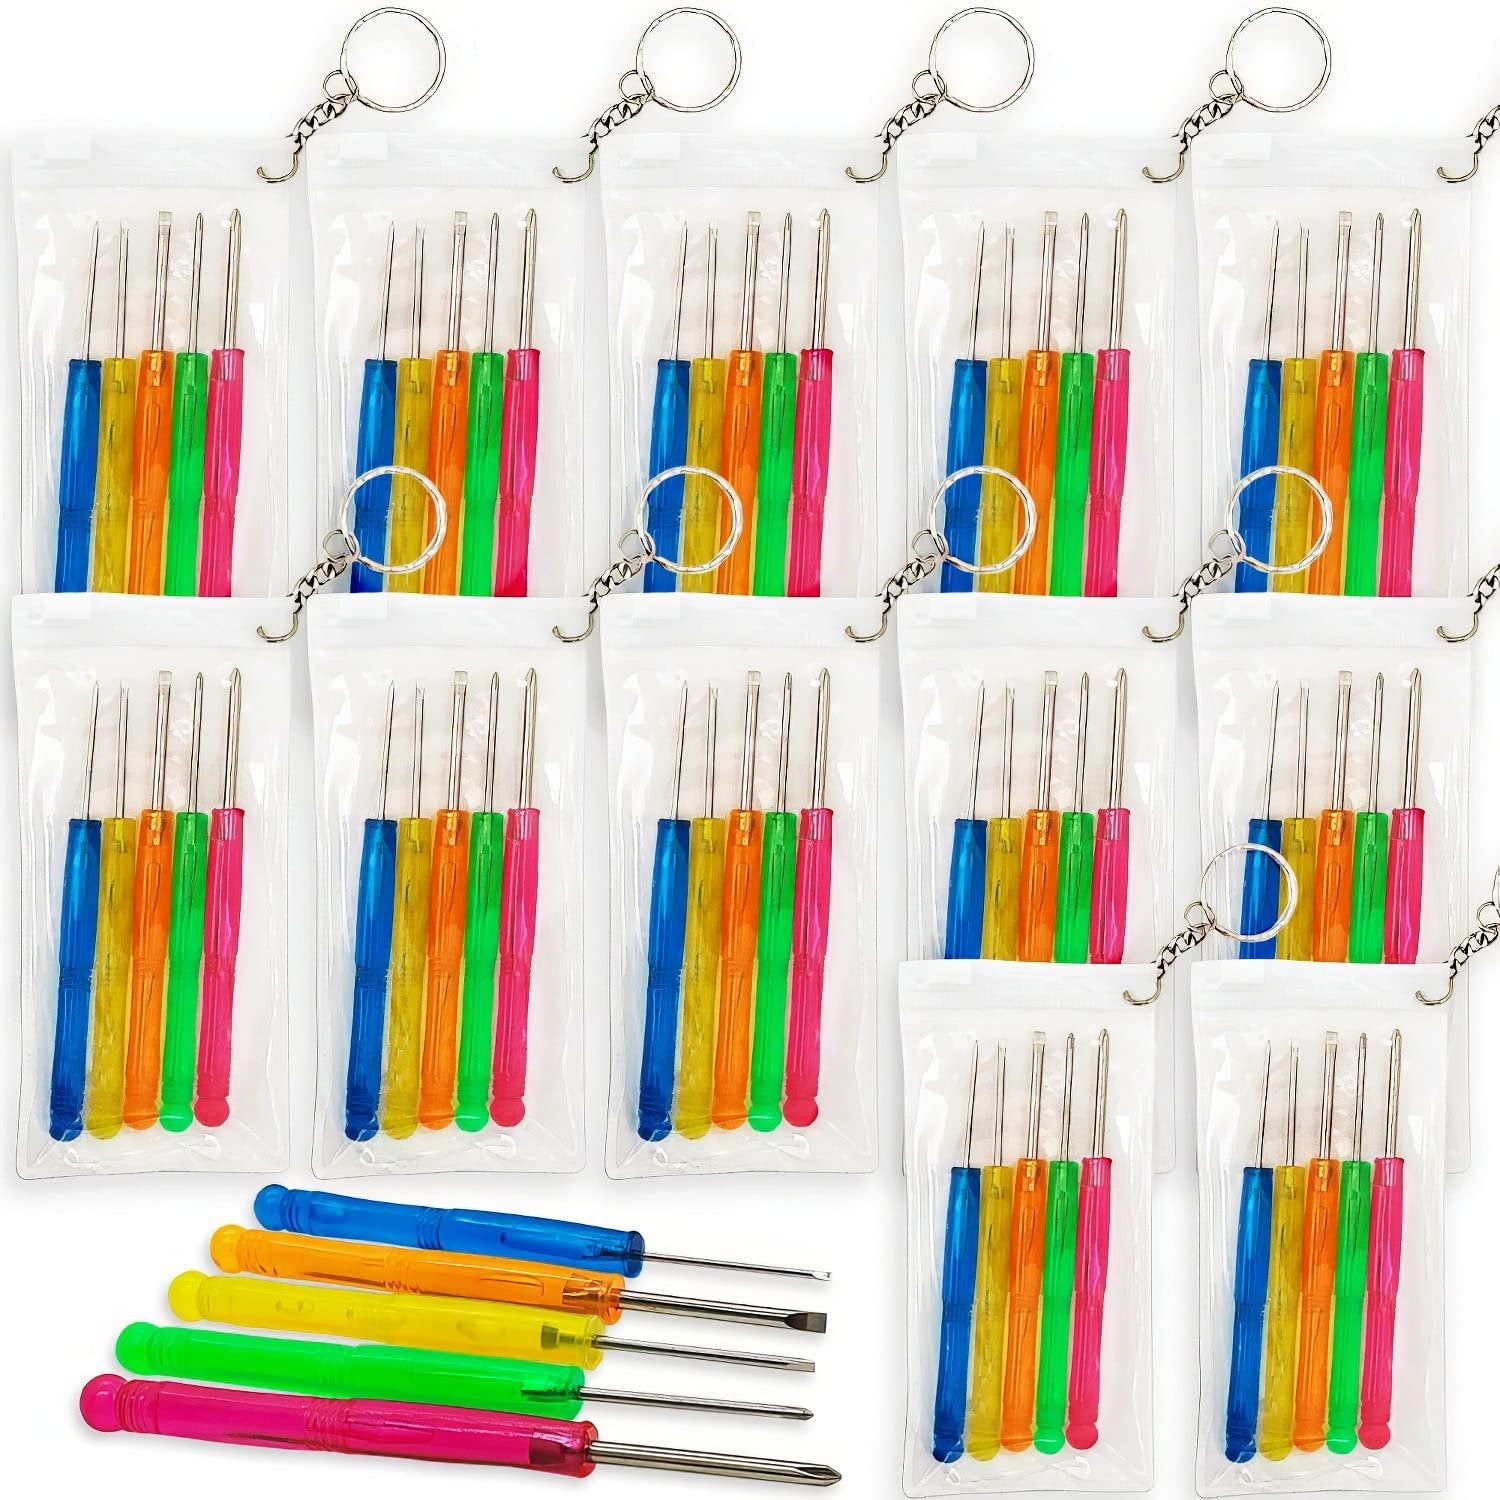 12 Pieces 1.5 Inch Tape Measure Keychains Functional Mini Tape Measures  with Stable Slide Lock Birthday Party Favors Goody Bag Fillers Prize